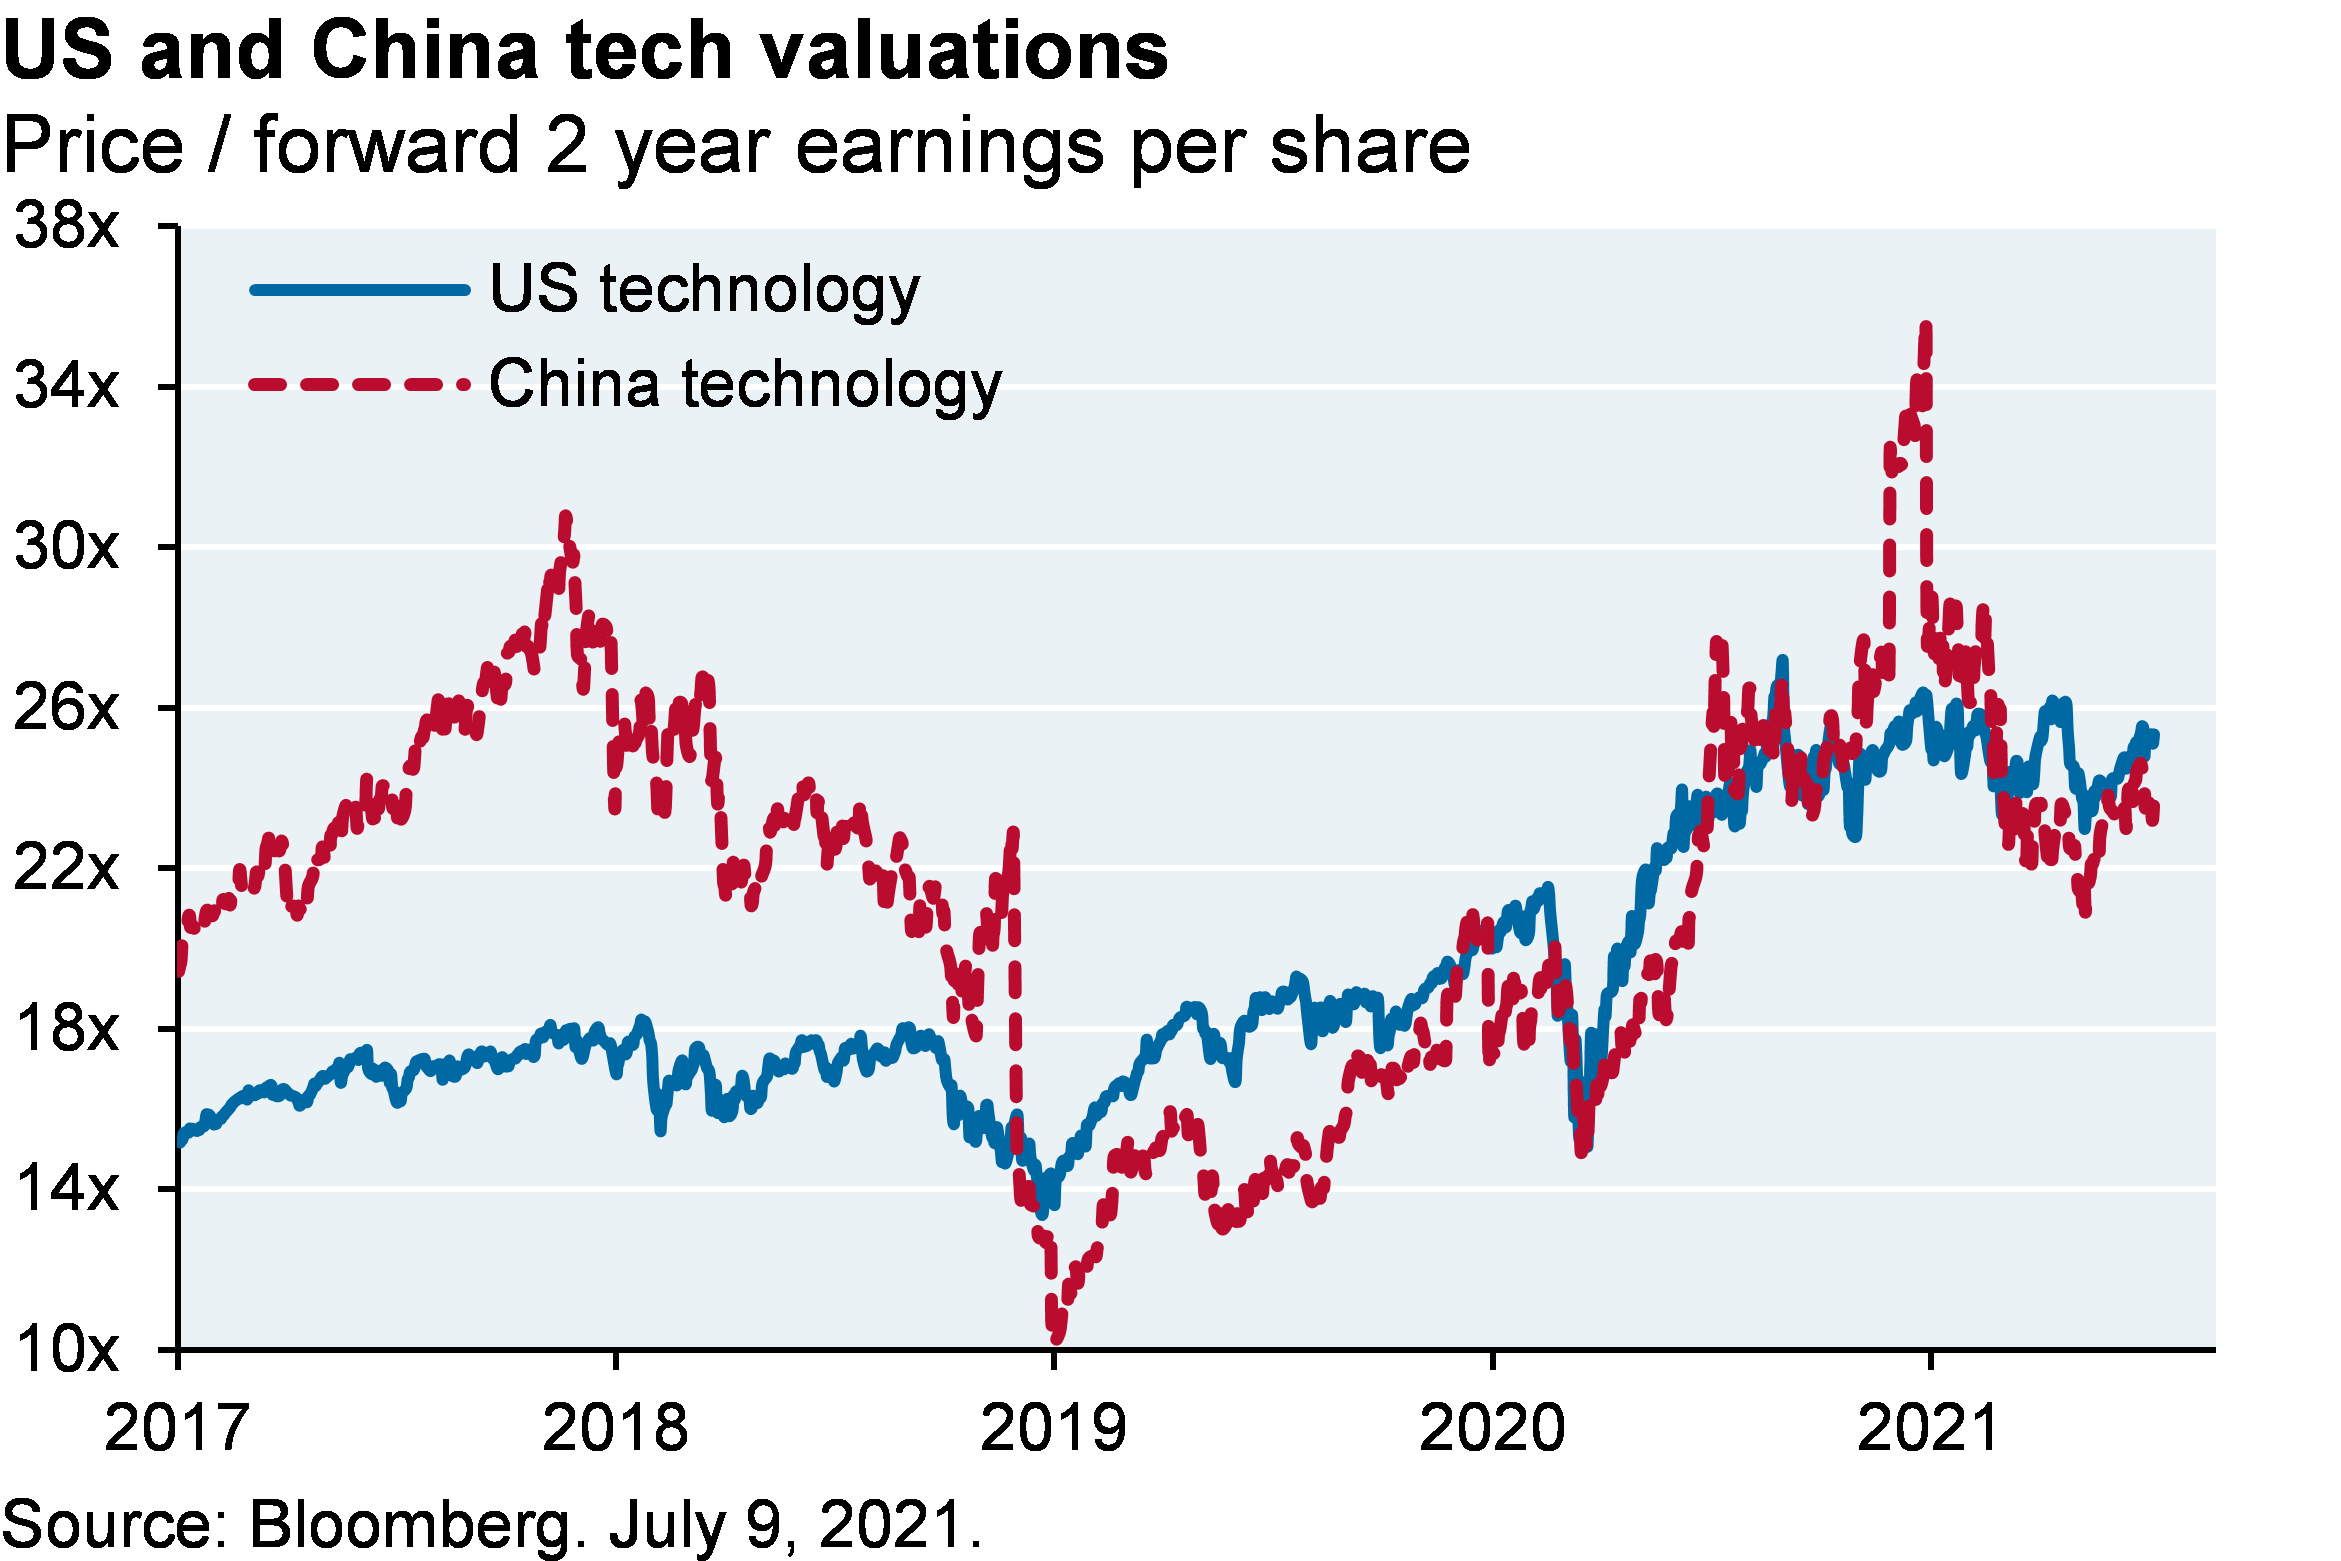 US and China tech valuations